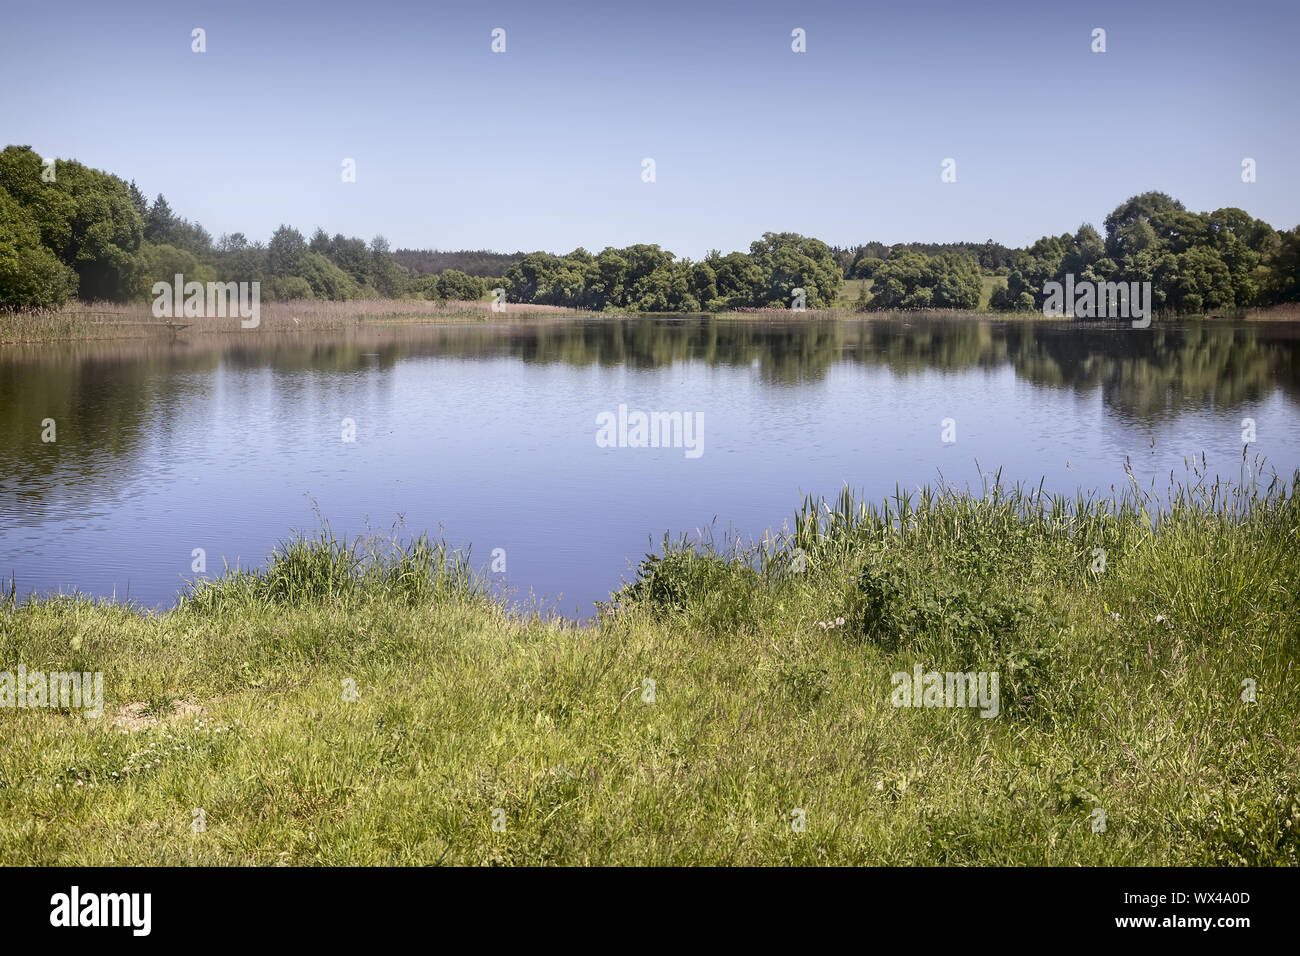 Large beautiful lake, with banks overgrown with forest. Stock Photo